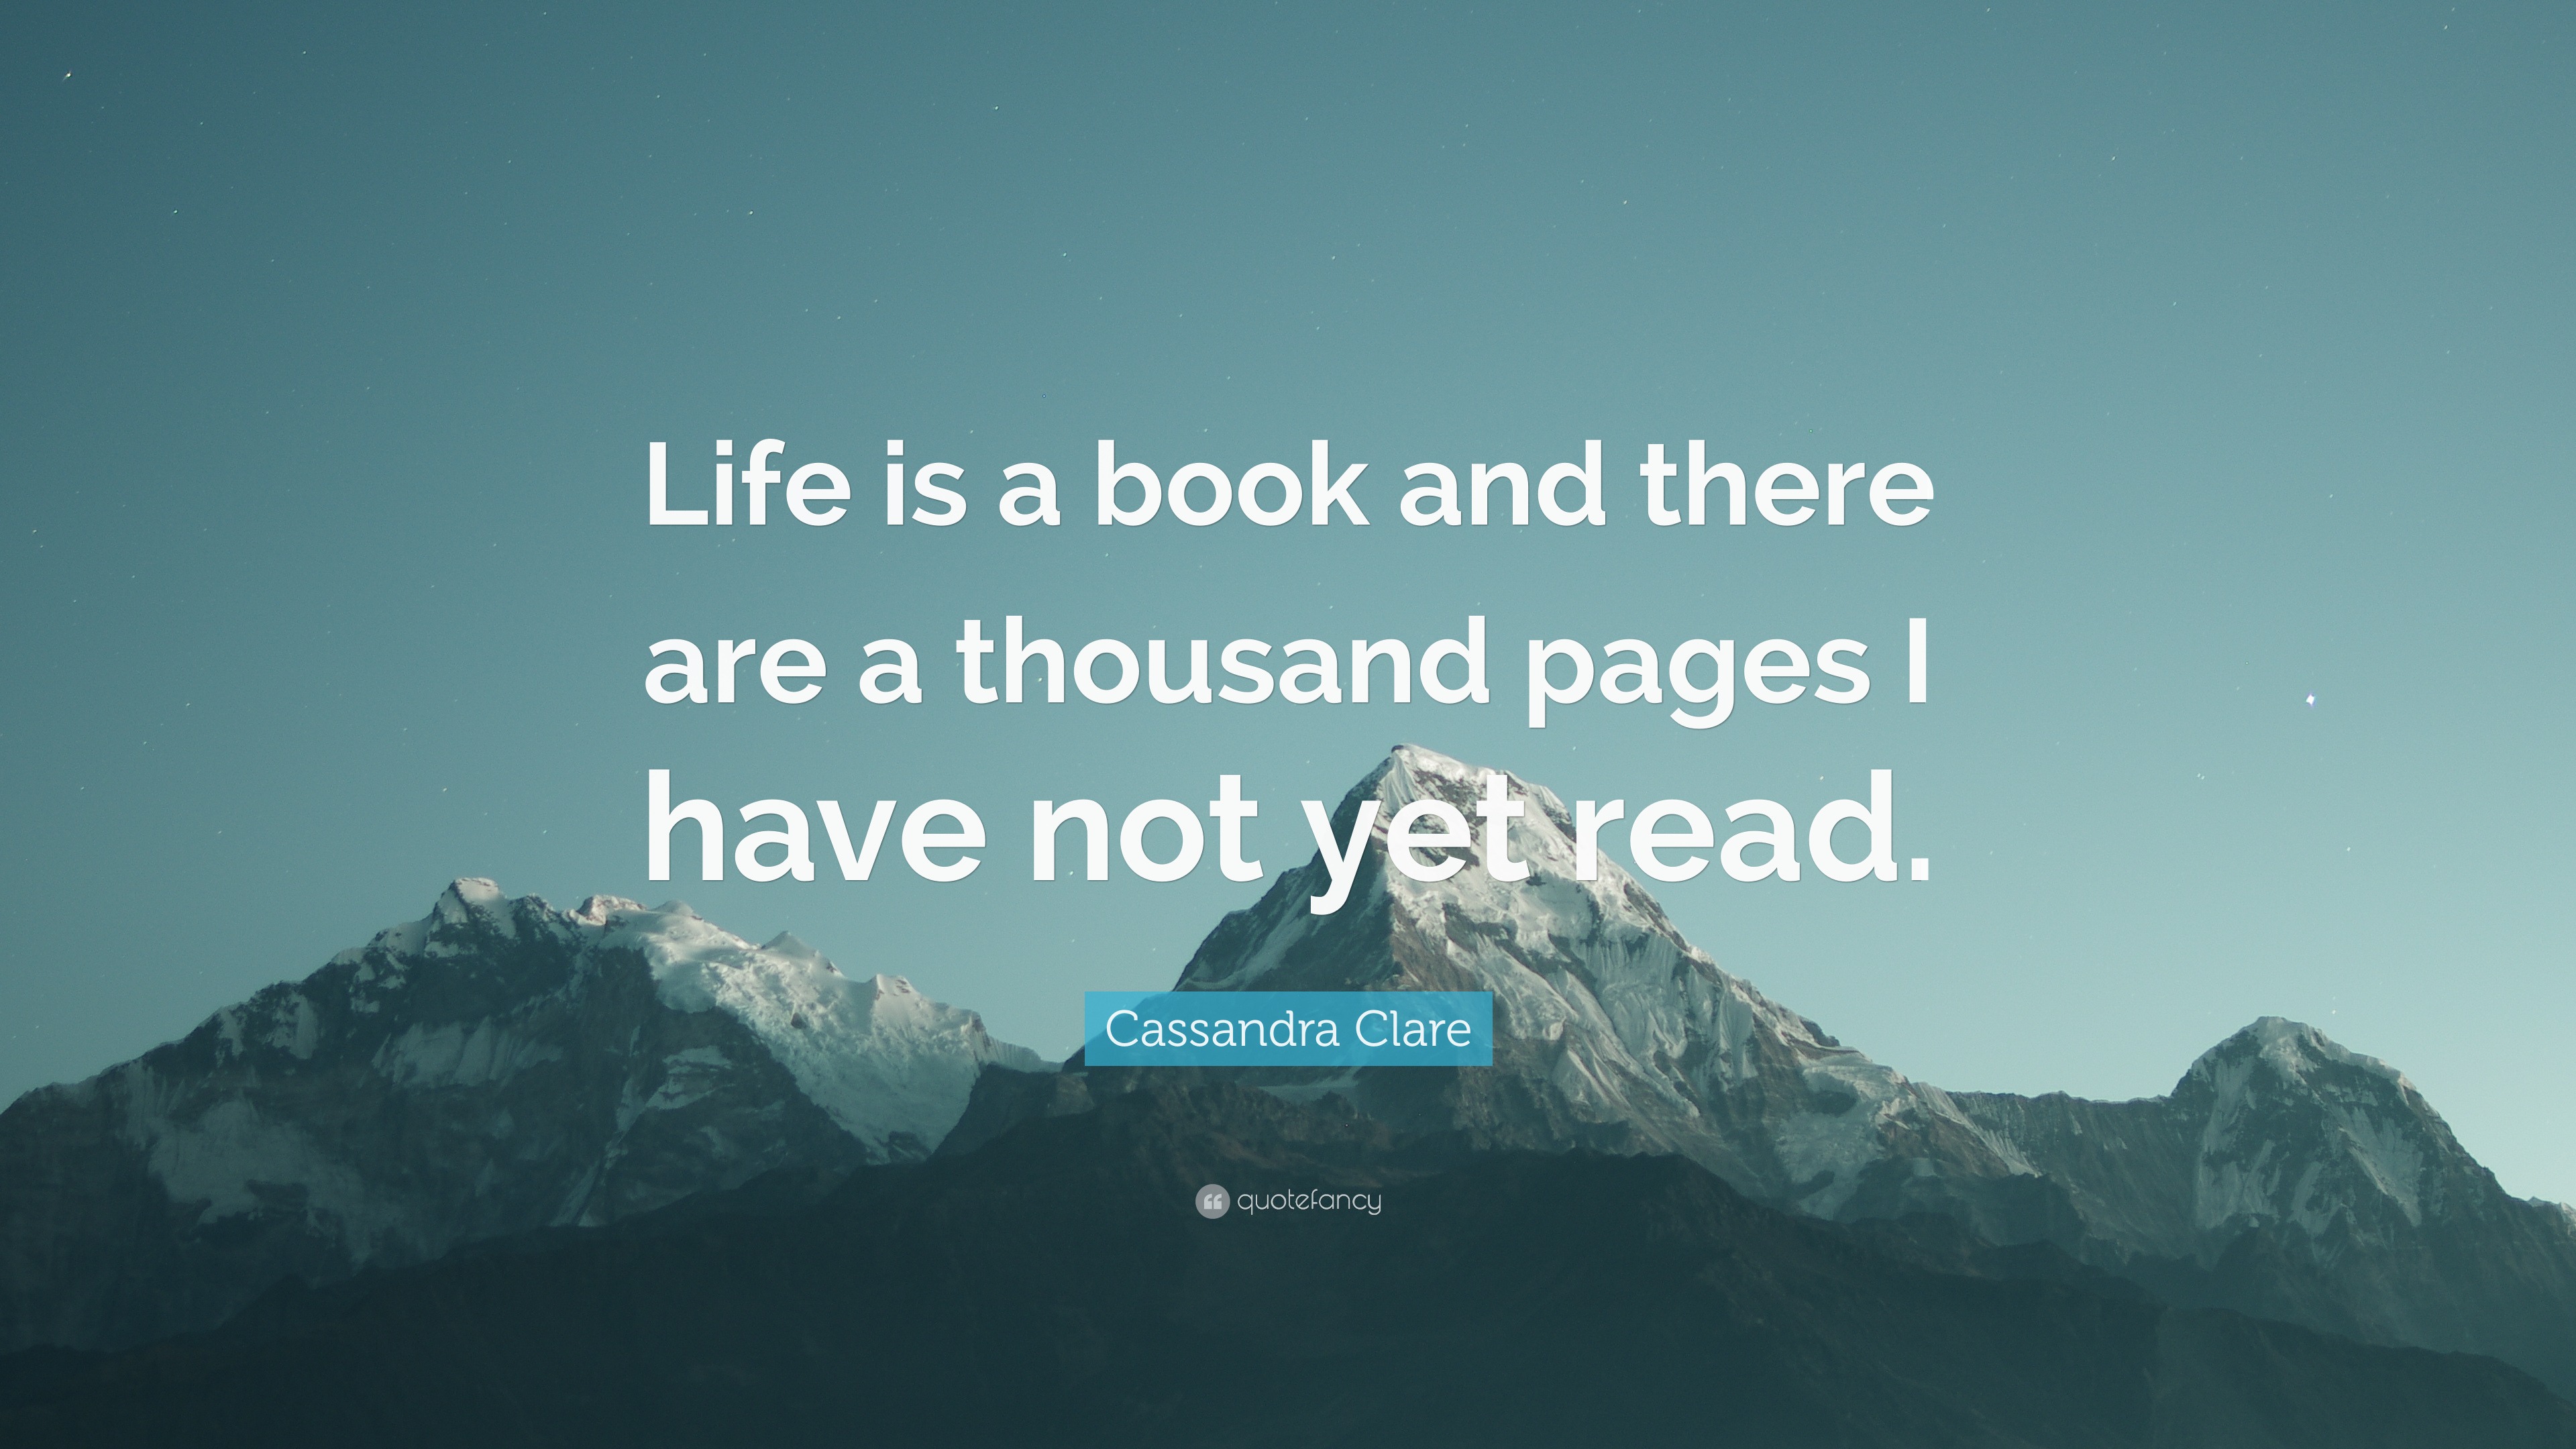 Cassandra Clare Quote: “Life is a book and there are a thousand pages I ...